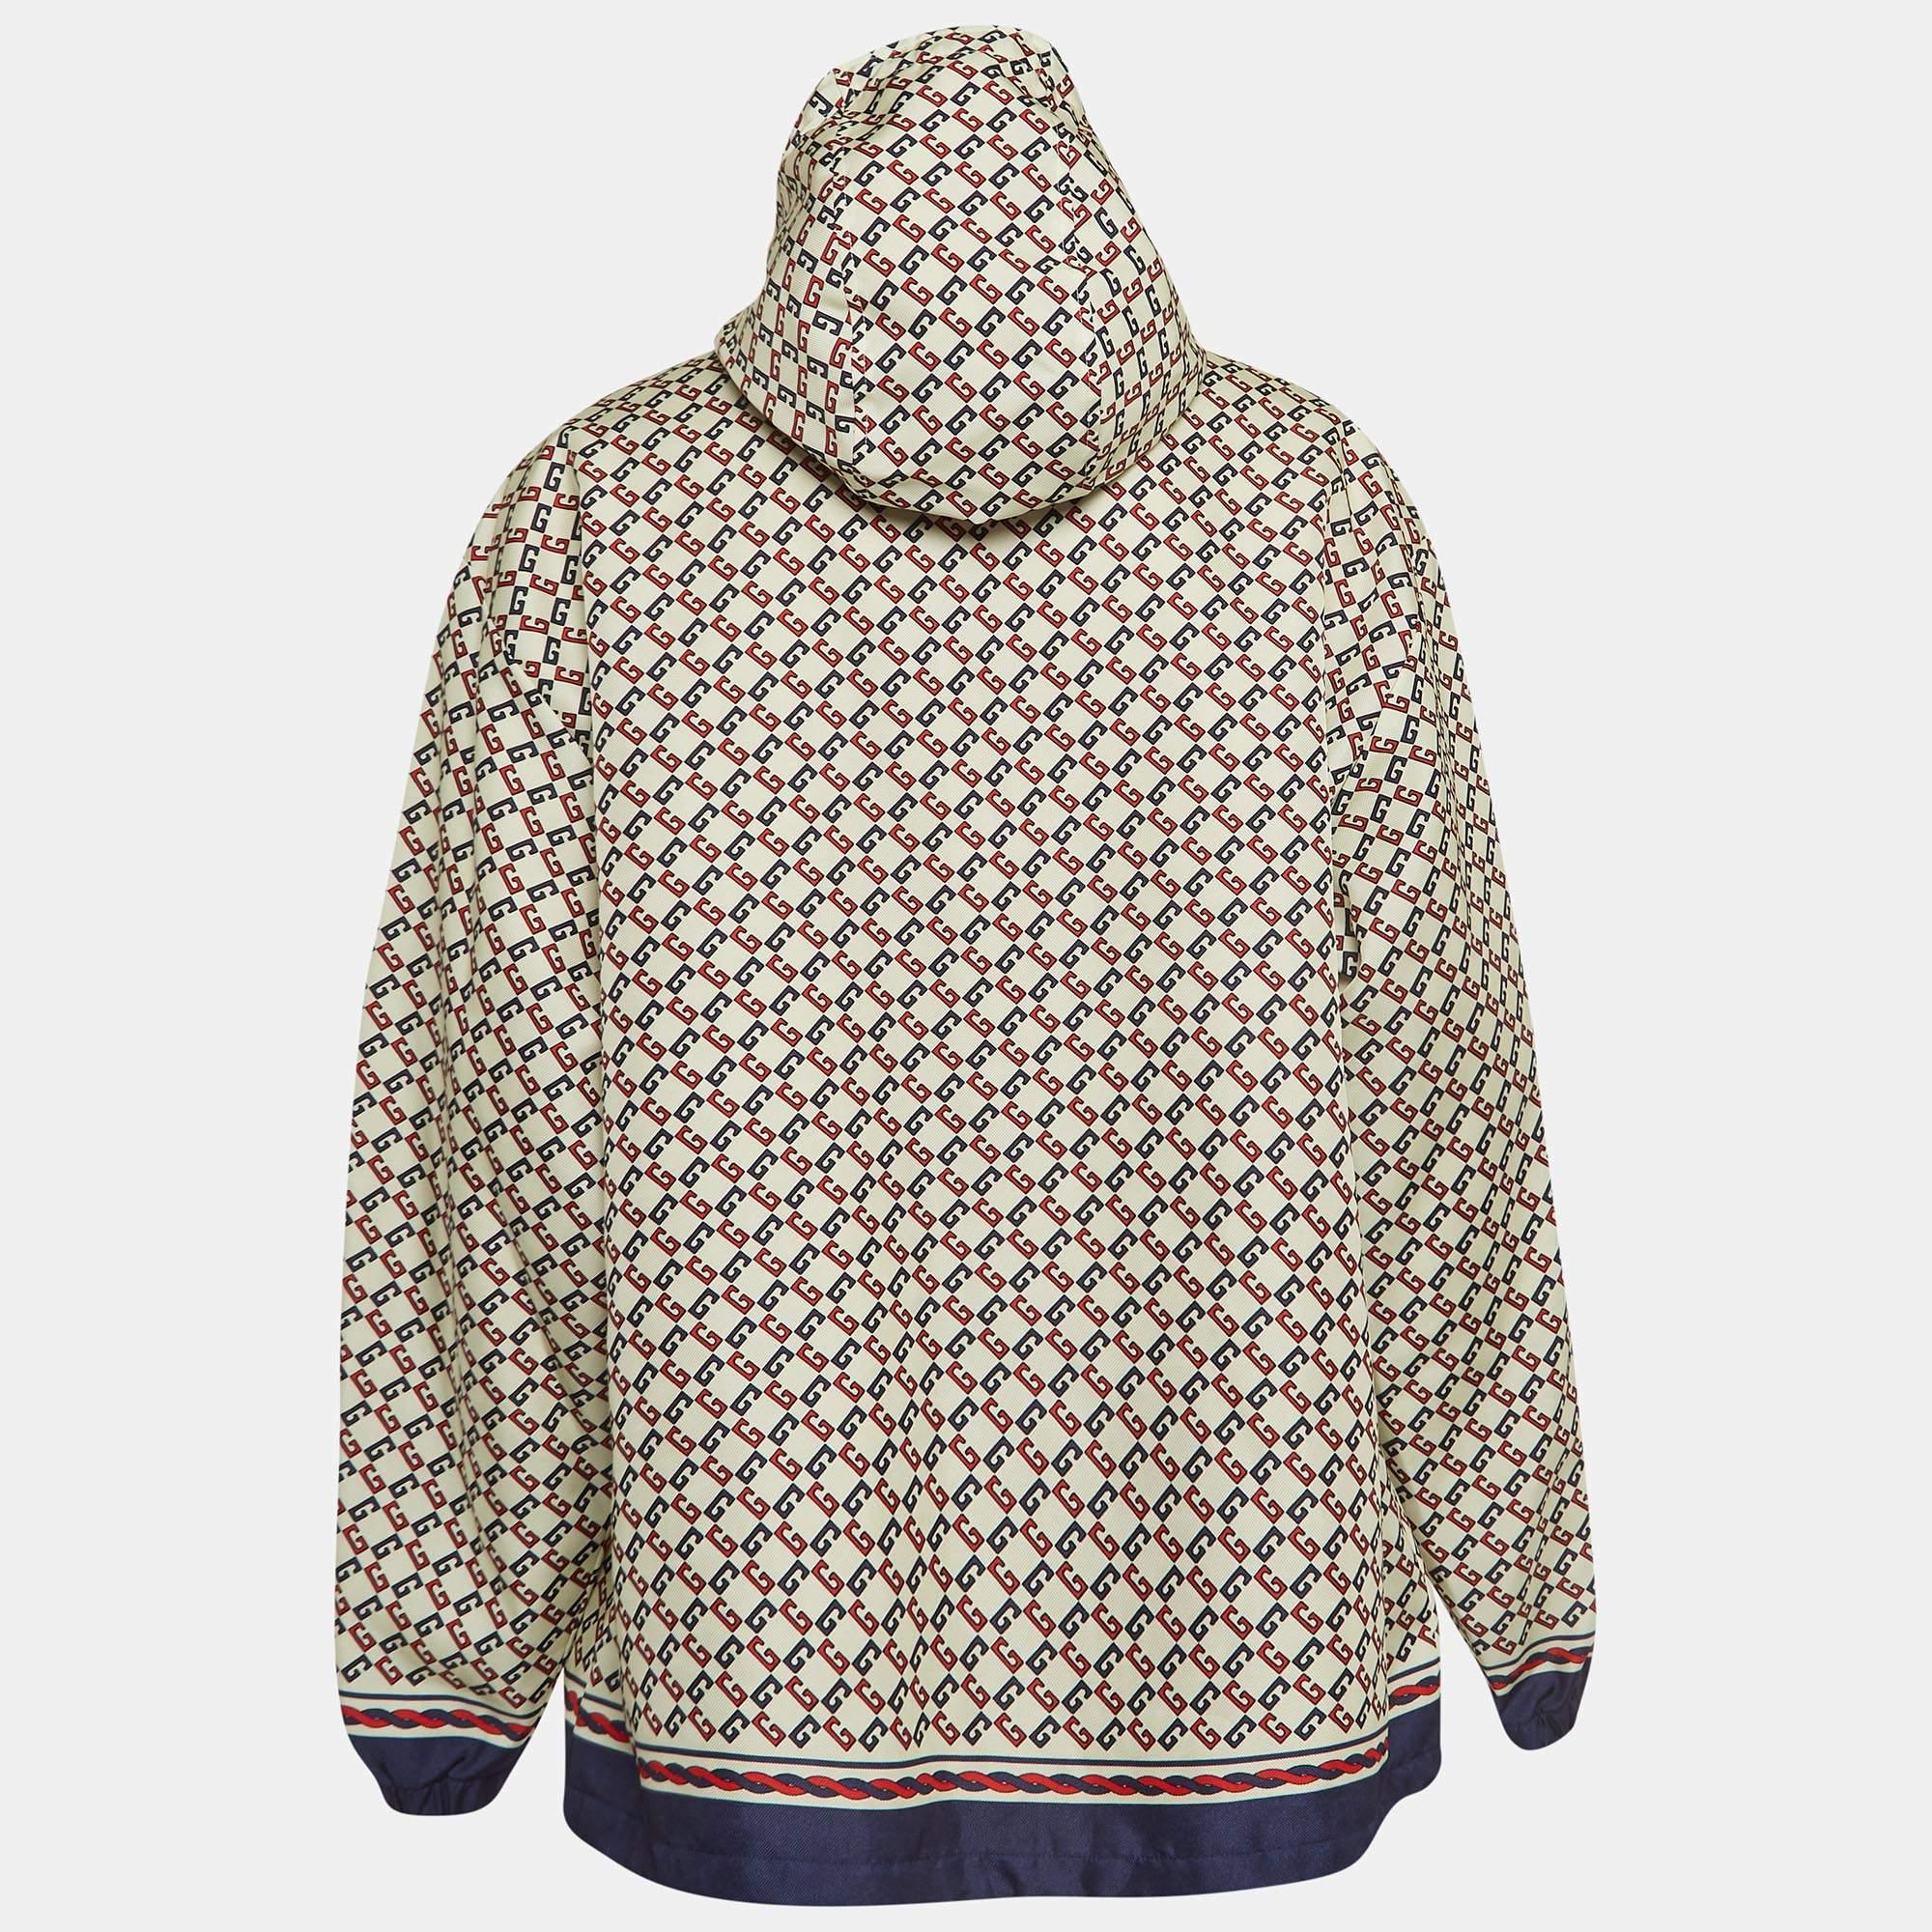 Made by Gucci, the Love Parade jacket embodies urban flair with a touch of luxury. Its cream hue, adorned with geometric GG prints, exudes contemporary charm. Made from high-quality nylon, it offers both style and functionality, perfect for